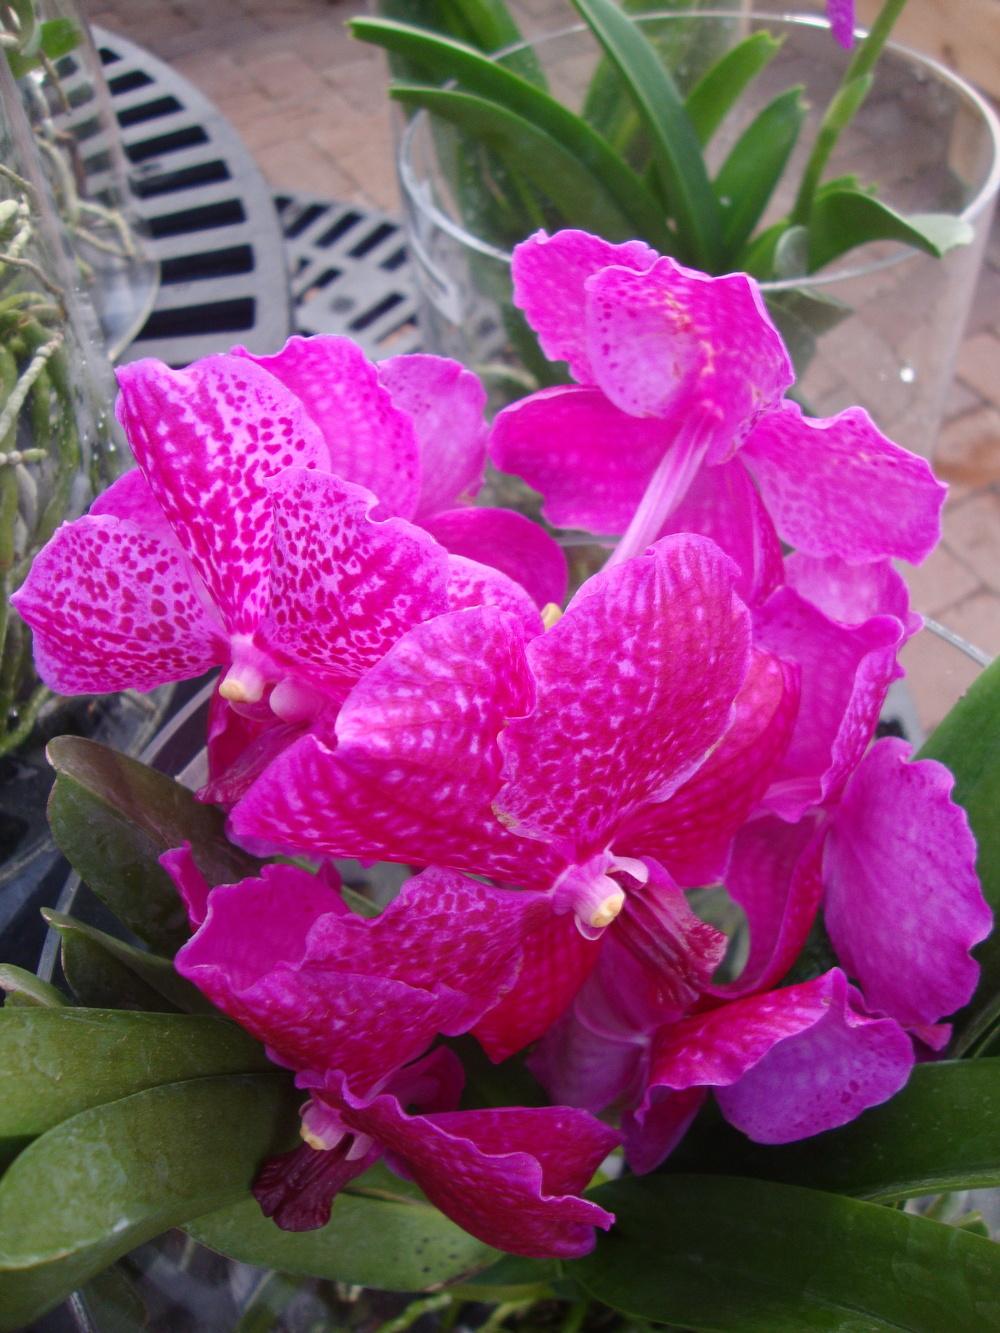 Photo of Orchid (Vanda) uploaded by Paul2032